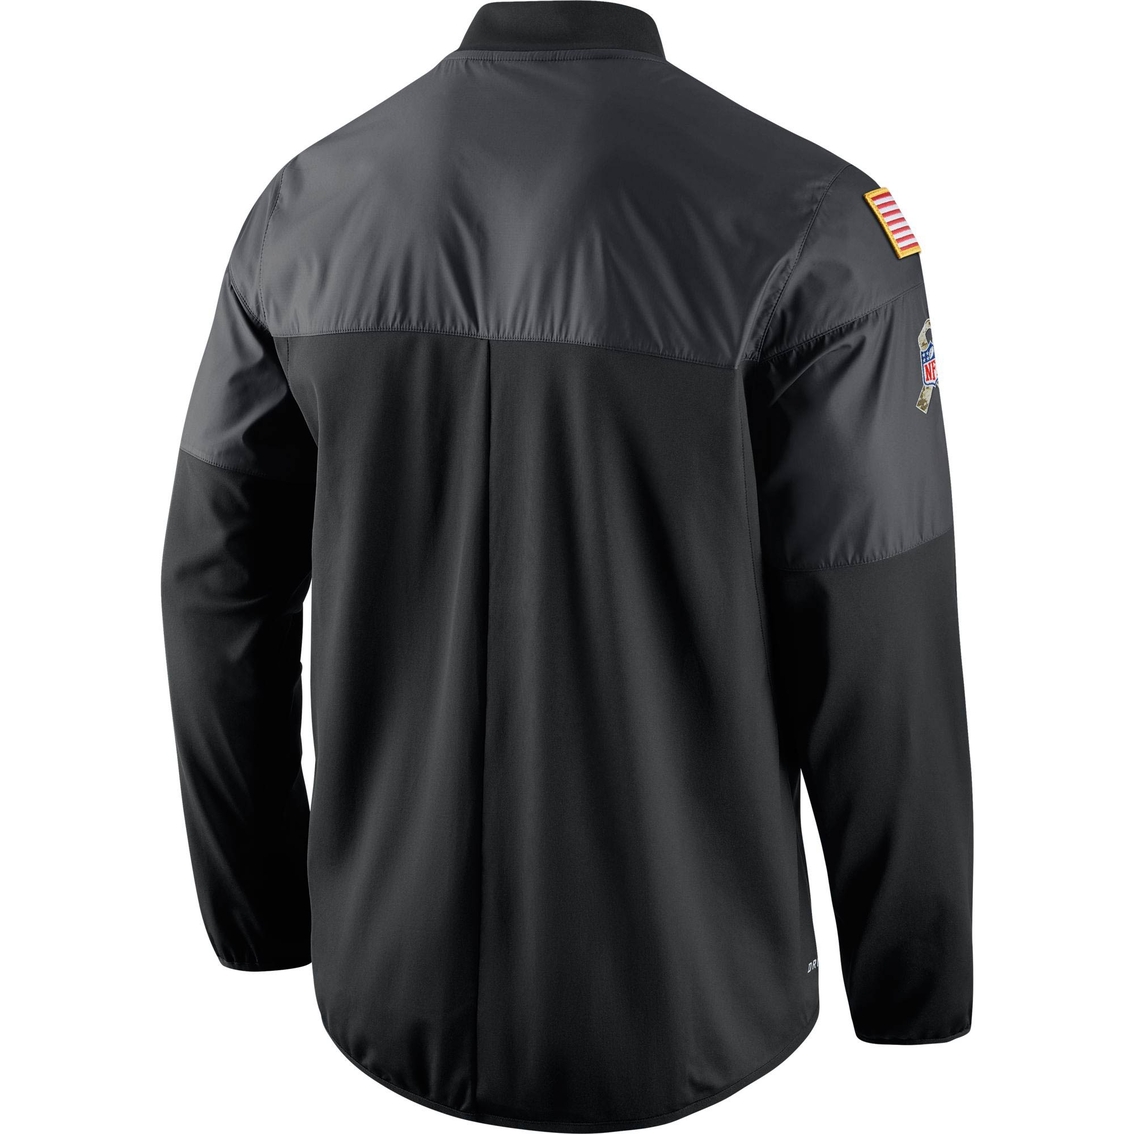 Nike NFL Green Bay Packers Salute To Service Jacket - Image 2 of 2